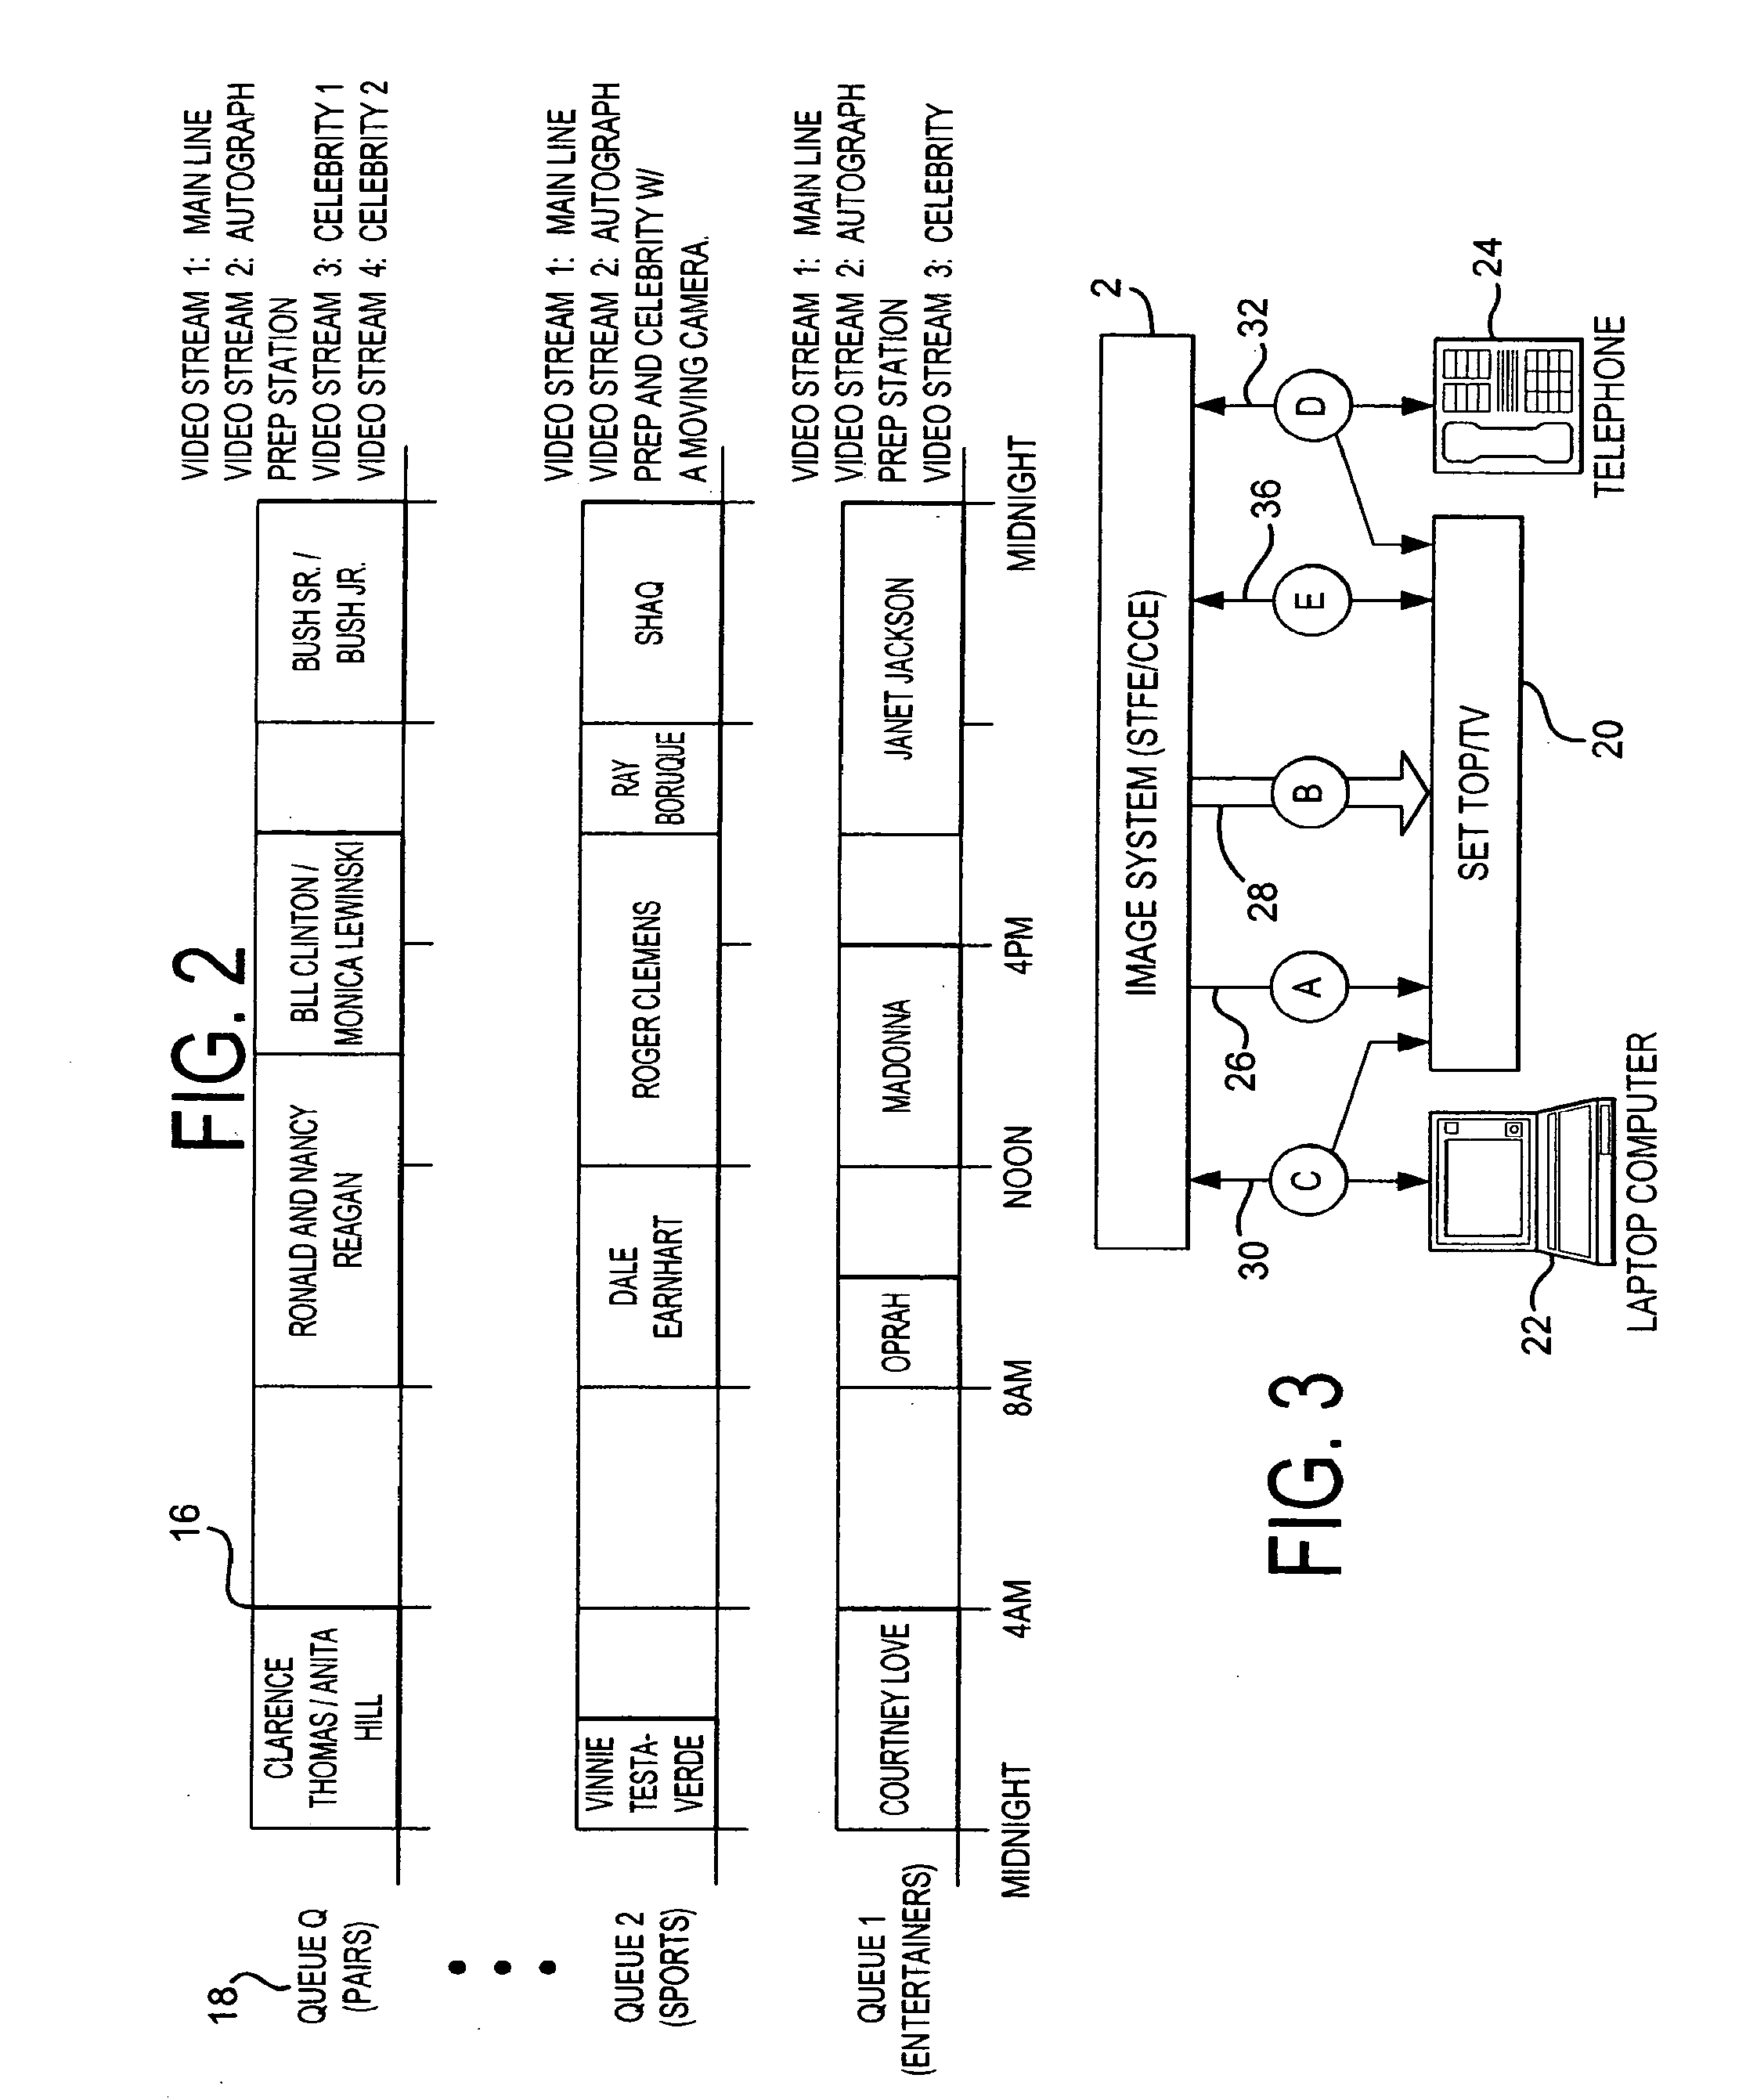 Interactive Television System and Method